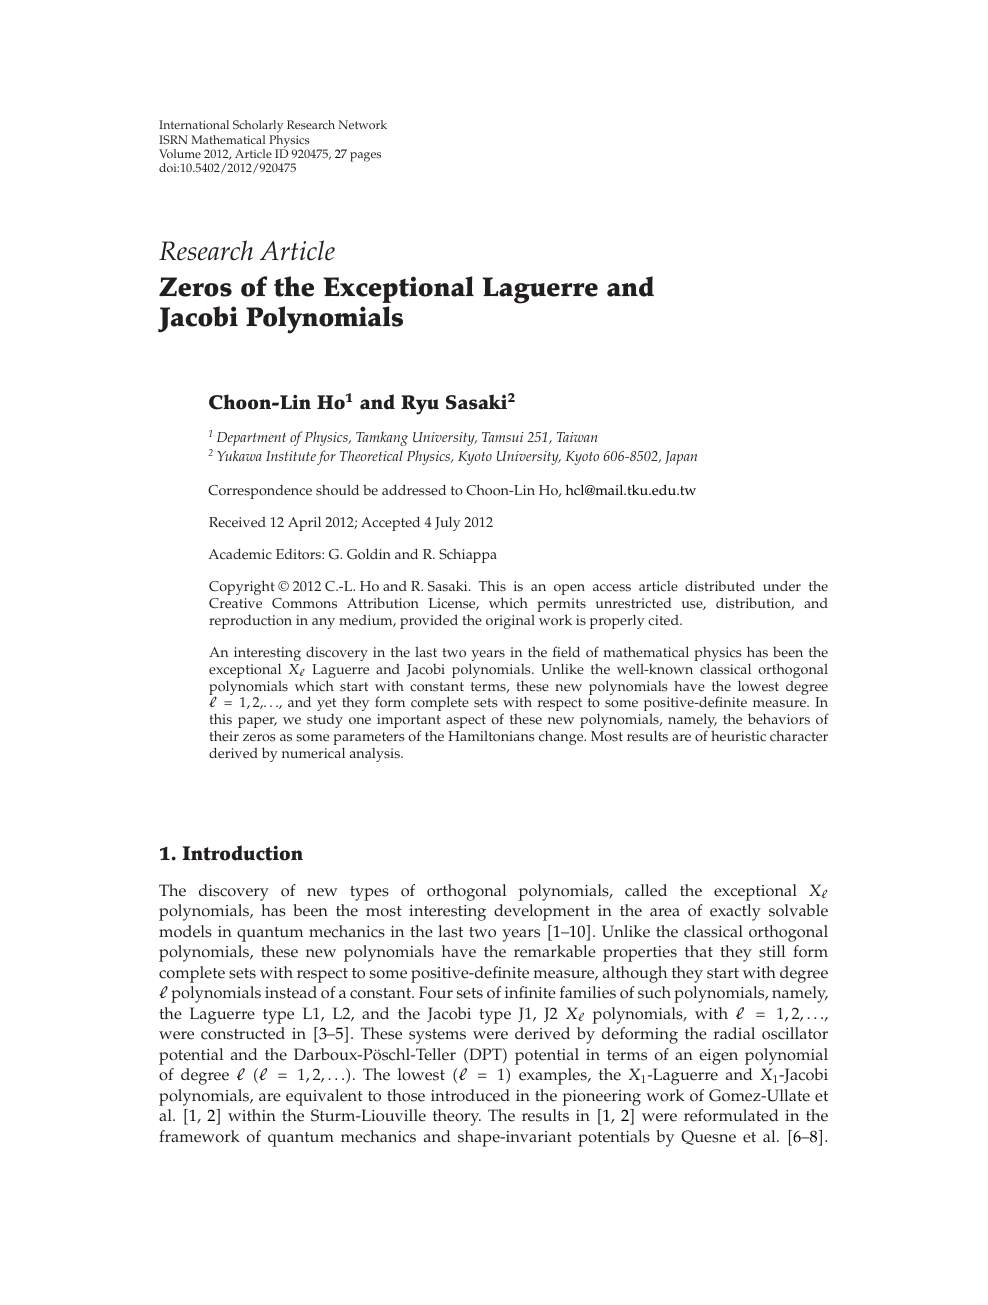 Zeros Of The Exceptional Laguerre And Jacobi Polynomials Topic Of Research Paper In Mathematics Download Scholarly Article Pdf And Read For Free On Cyberleninka Open Science Hub